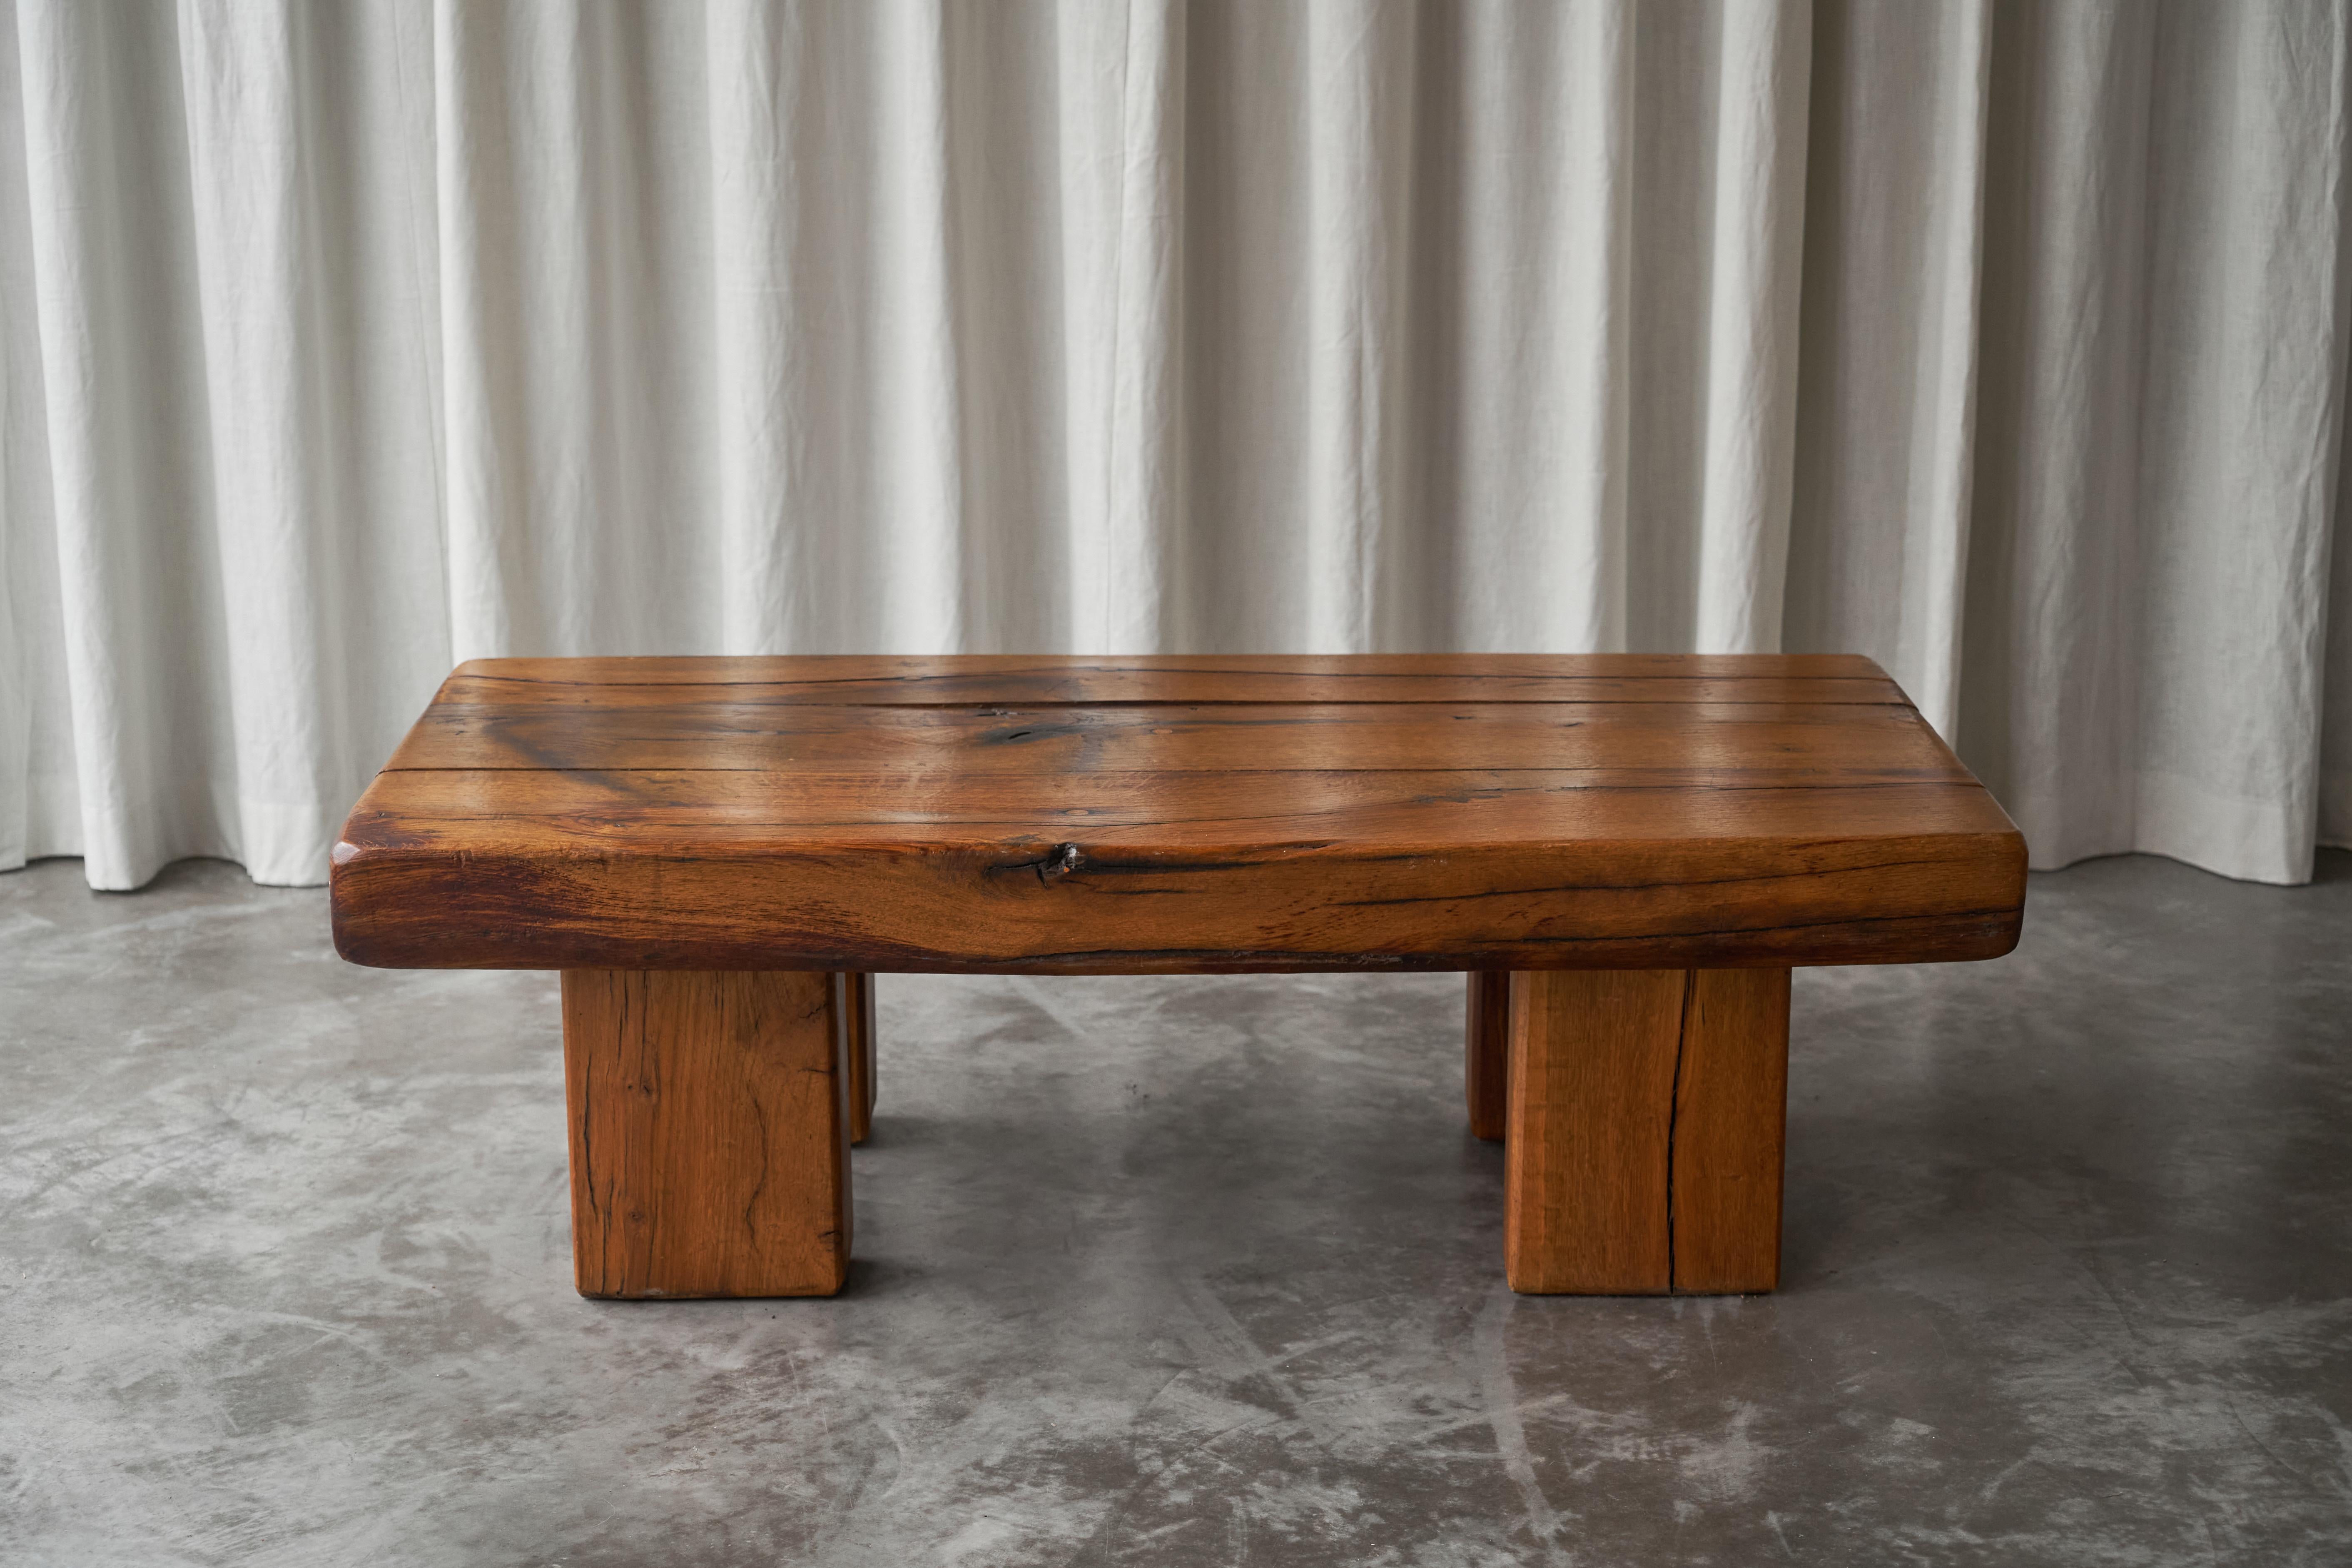 Brutalist Solid Oak Beam Coffee Table, Europe, 1970s.

This monumental Brutalist solid oak beam coffee table was made in the 1970s, in Europe. It has a modest yet a very strong appearance, free of any decoration. The rectangular legs are placed